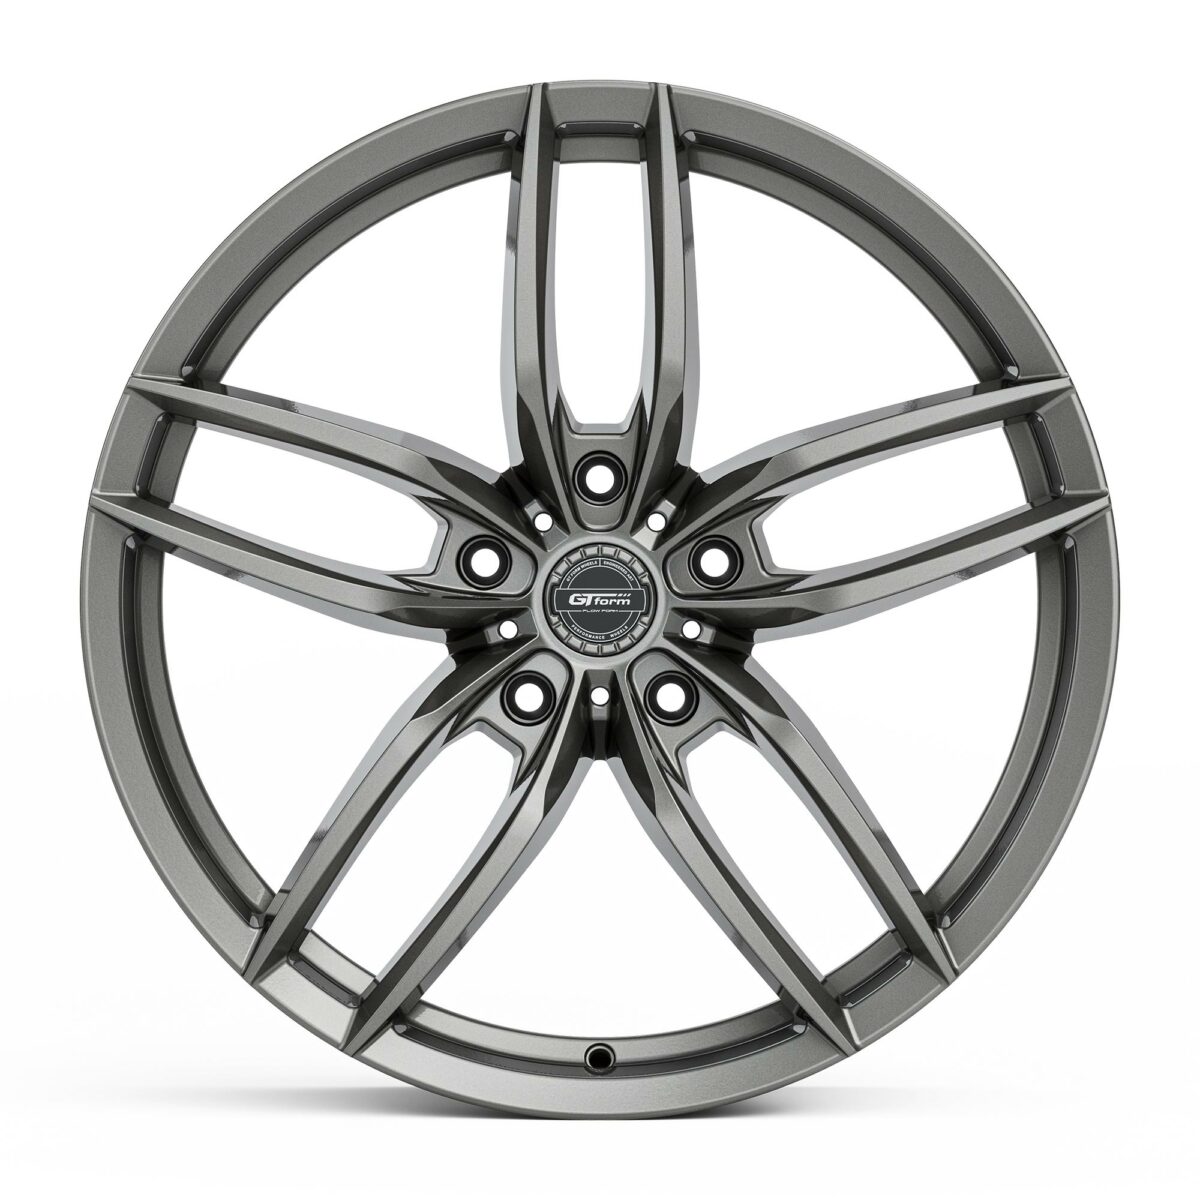 GT Form Sadow Gloss Gunmetal Staggered Rims 19 20 inch Performance Wheels